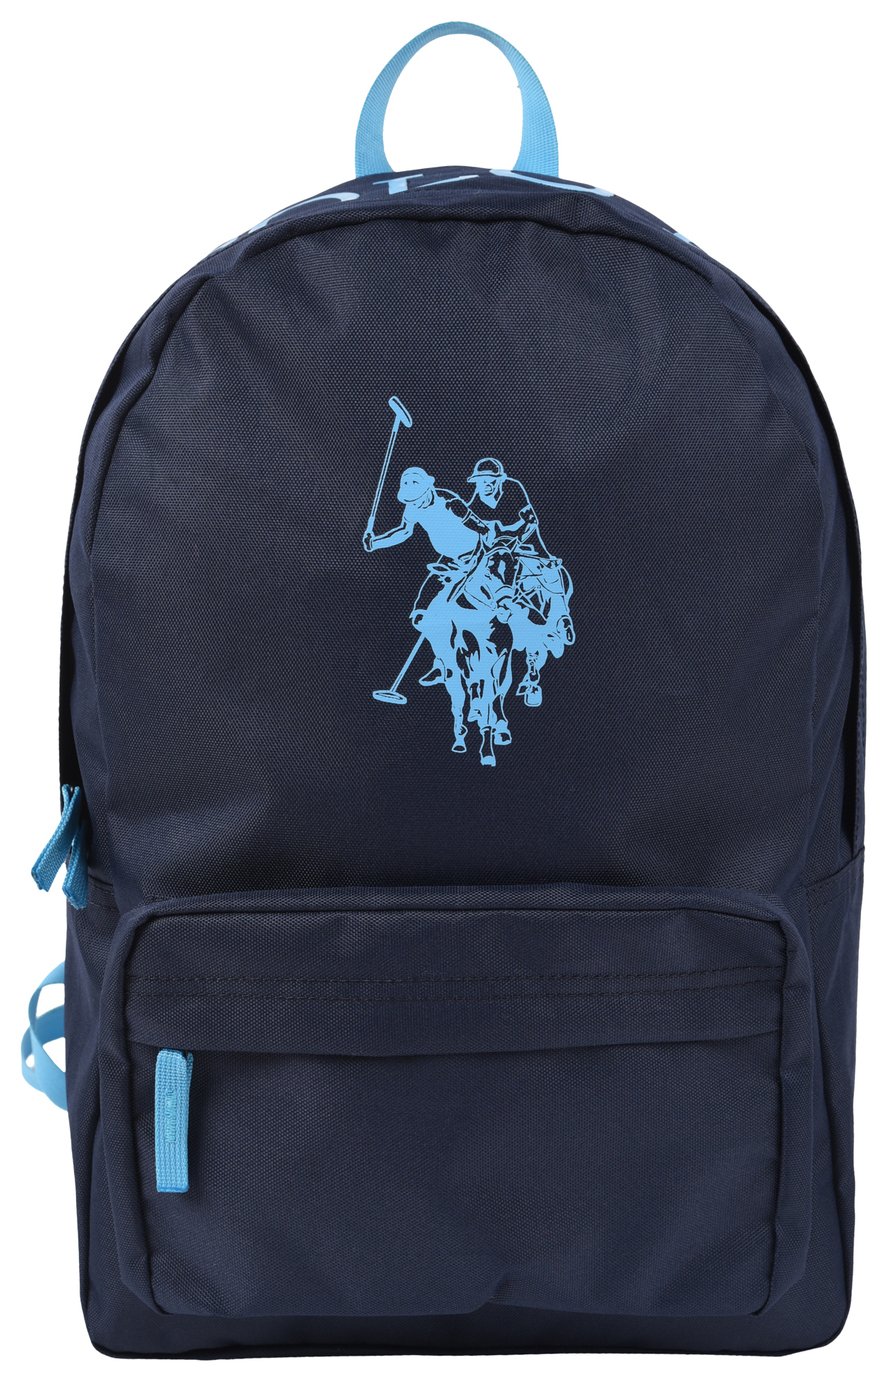 US Polo Assn. 14L Backpack - Navy Blue